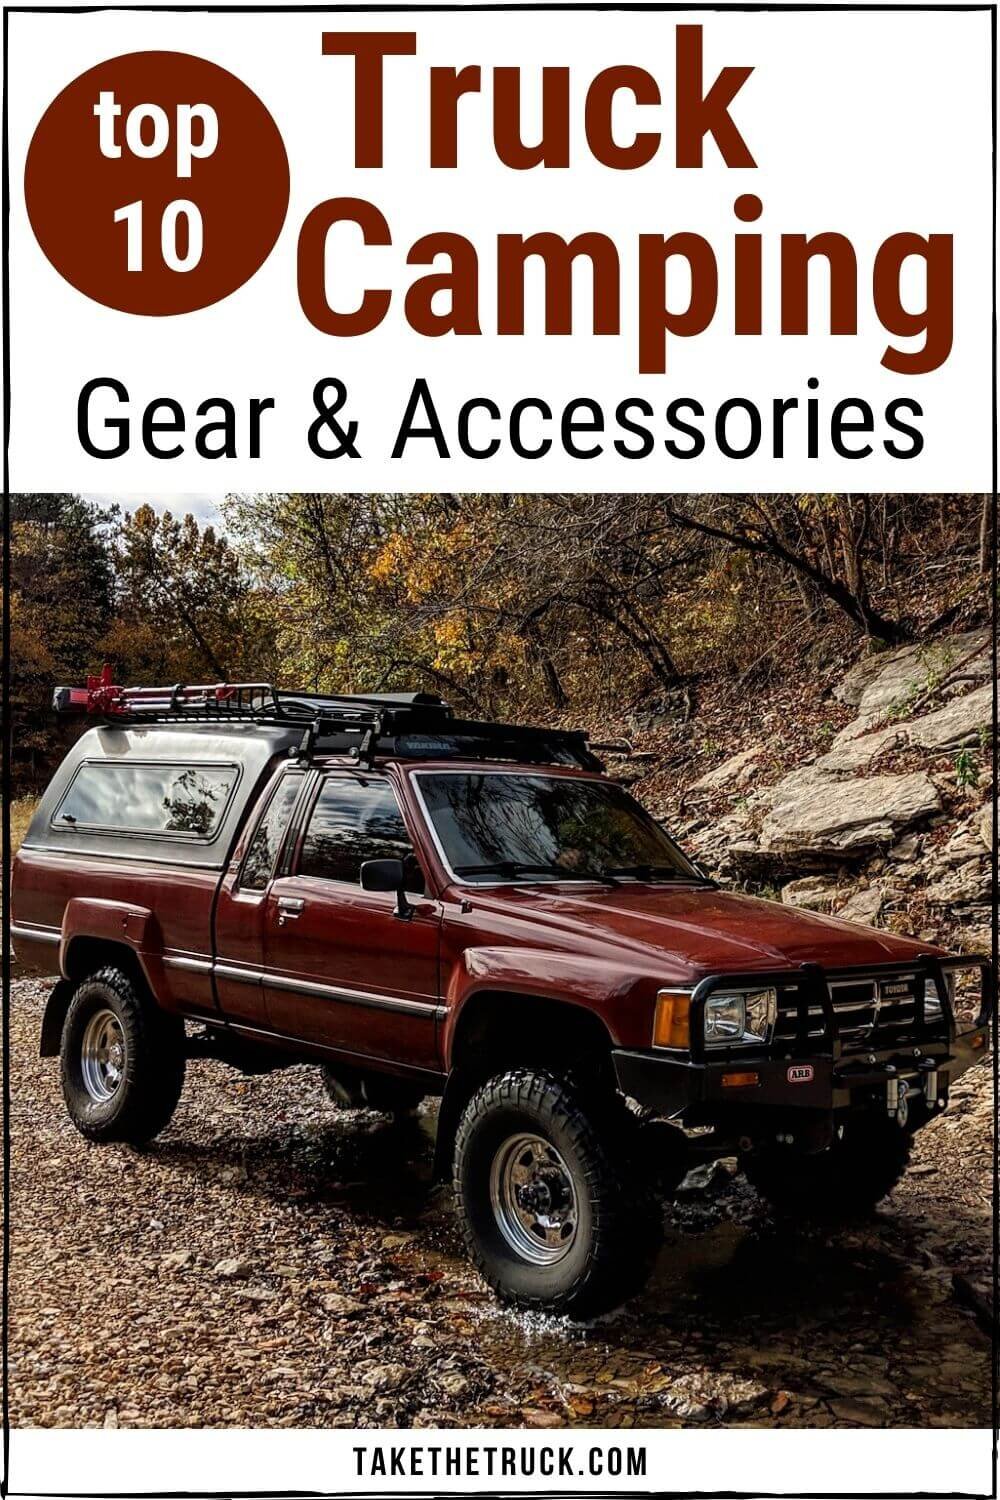 Top ten truck camping accessories and truck bed camping gear or overland truck gear that we recommend, whether you’re new to pickup truck camping or an old pro!